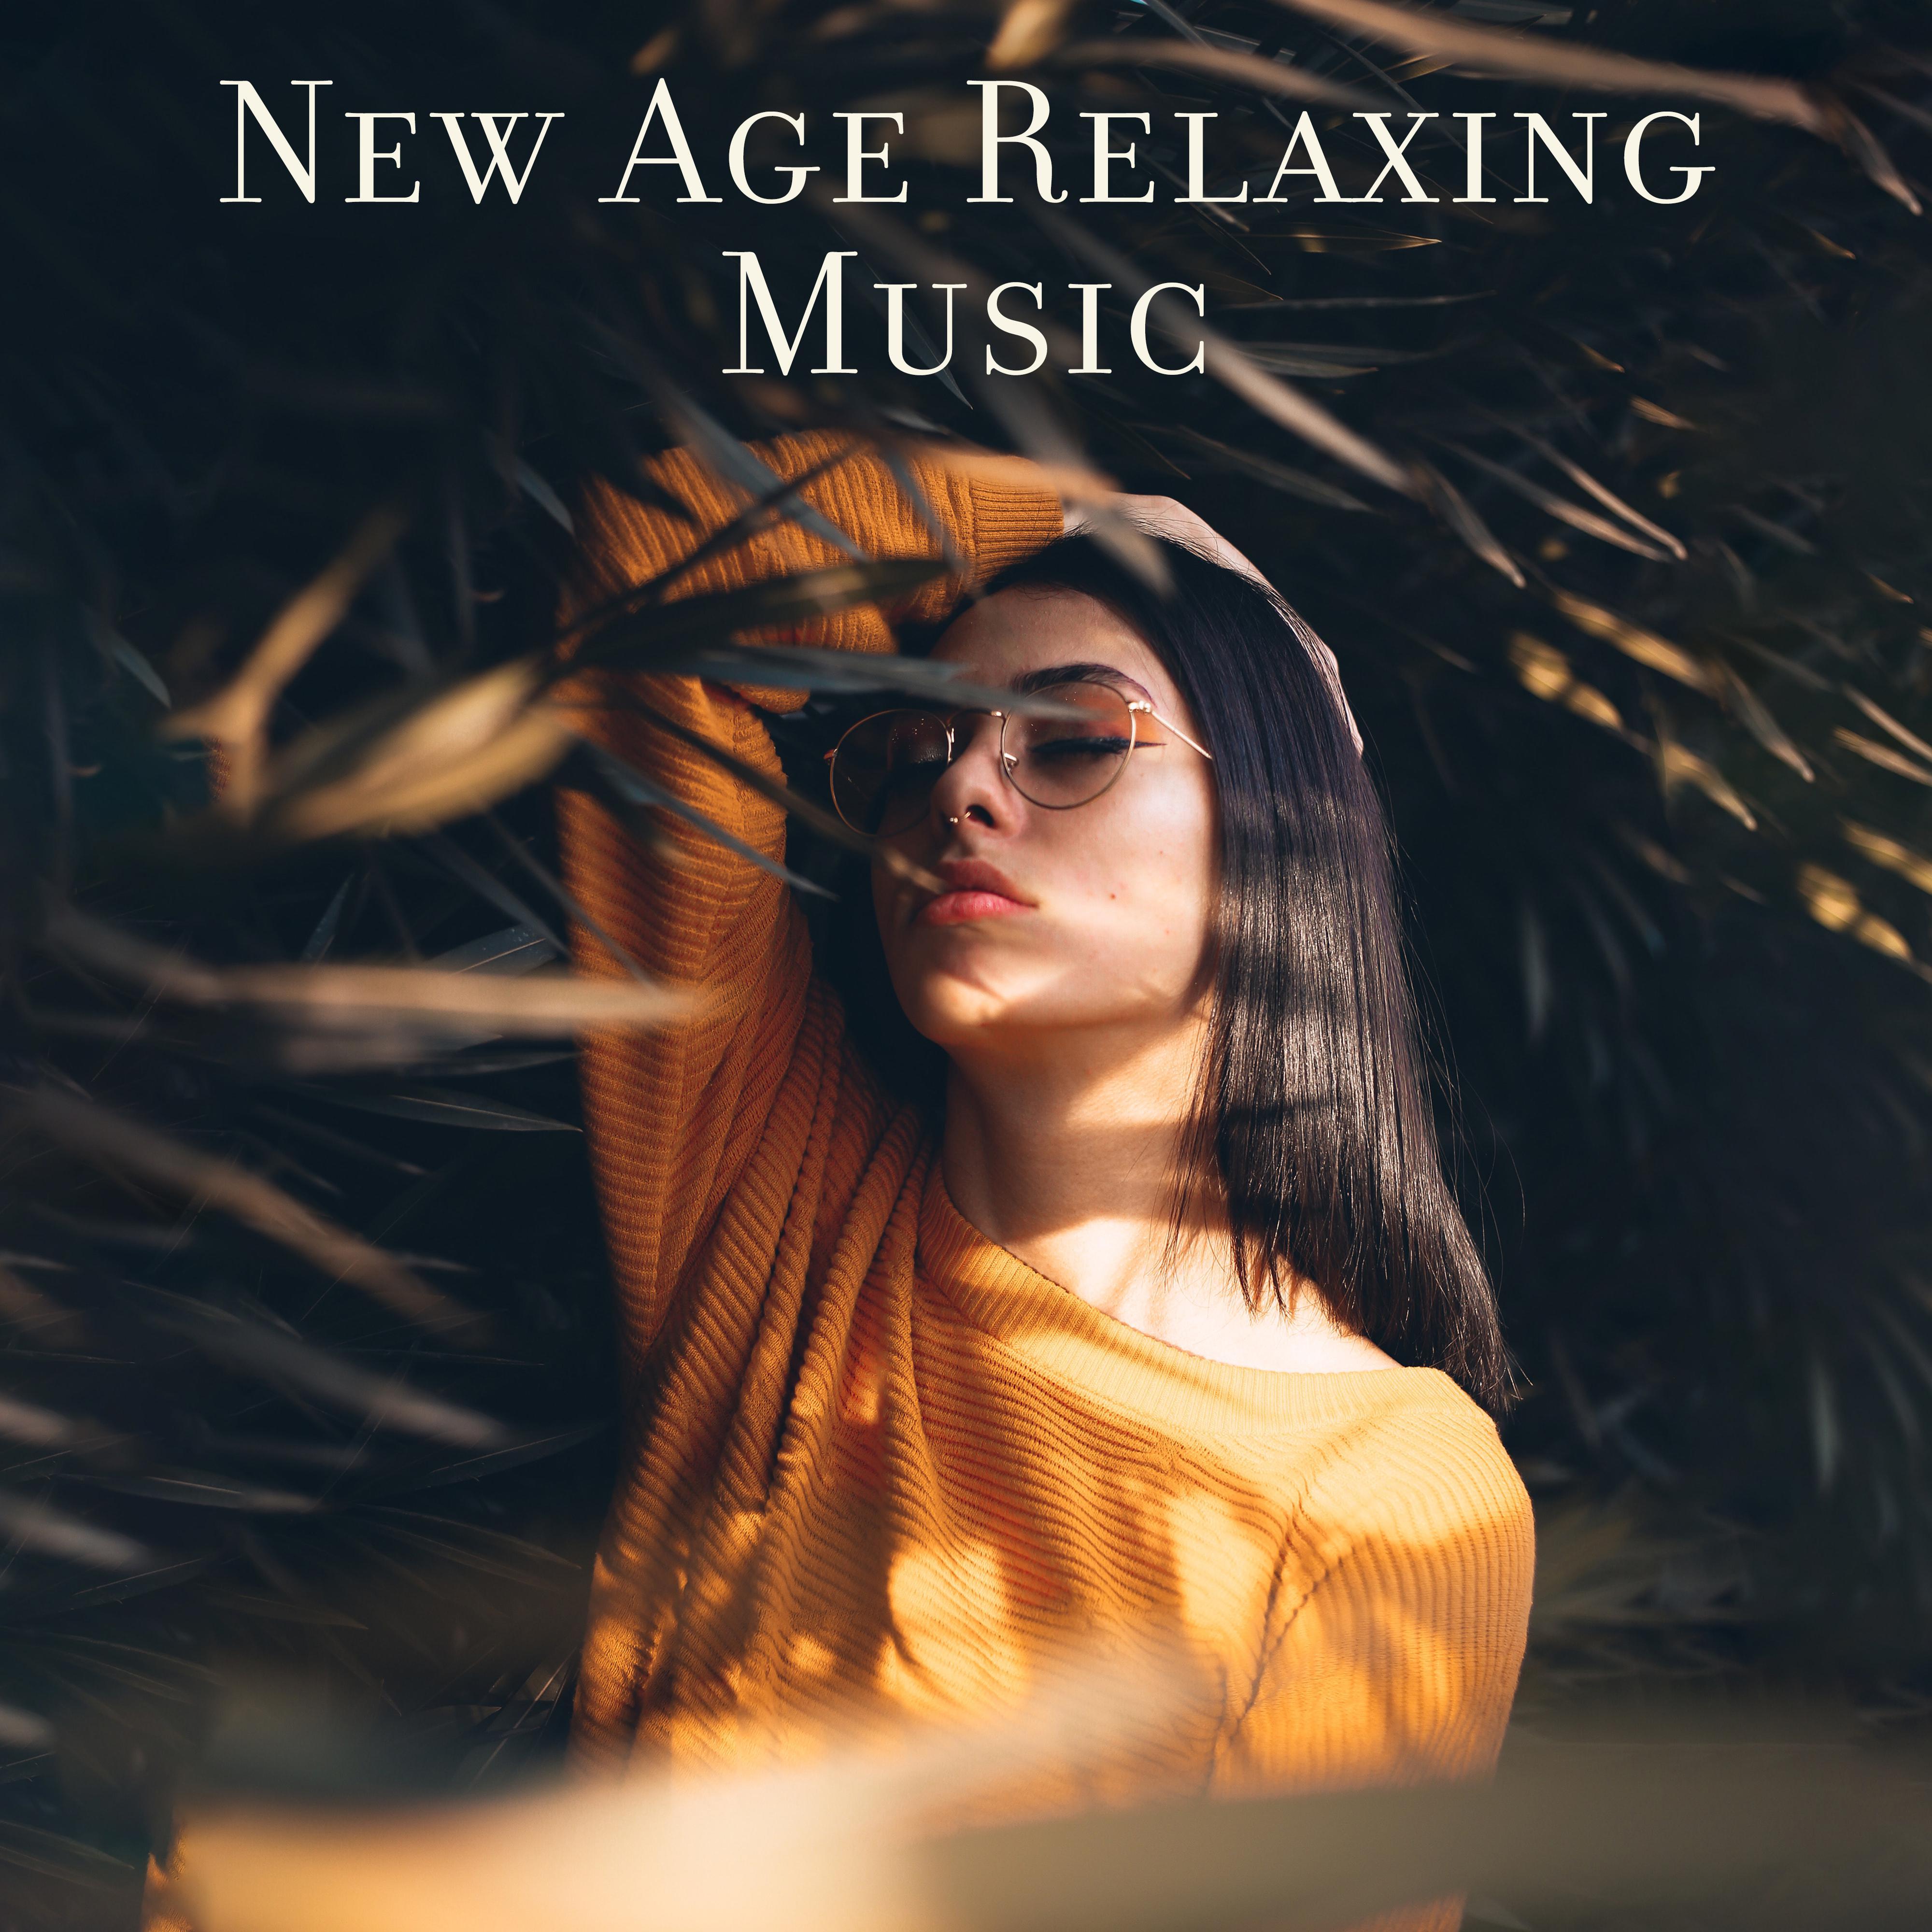 New Age Relaxing Music